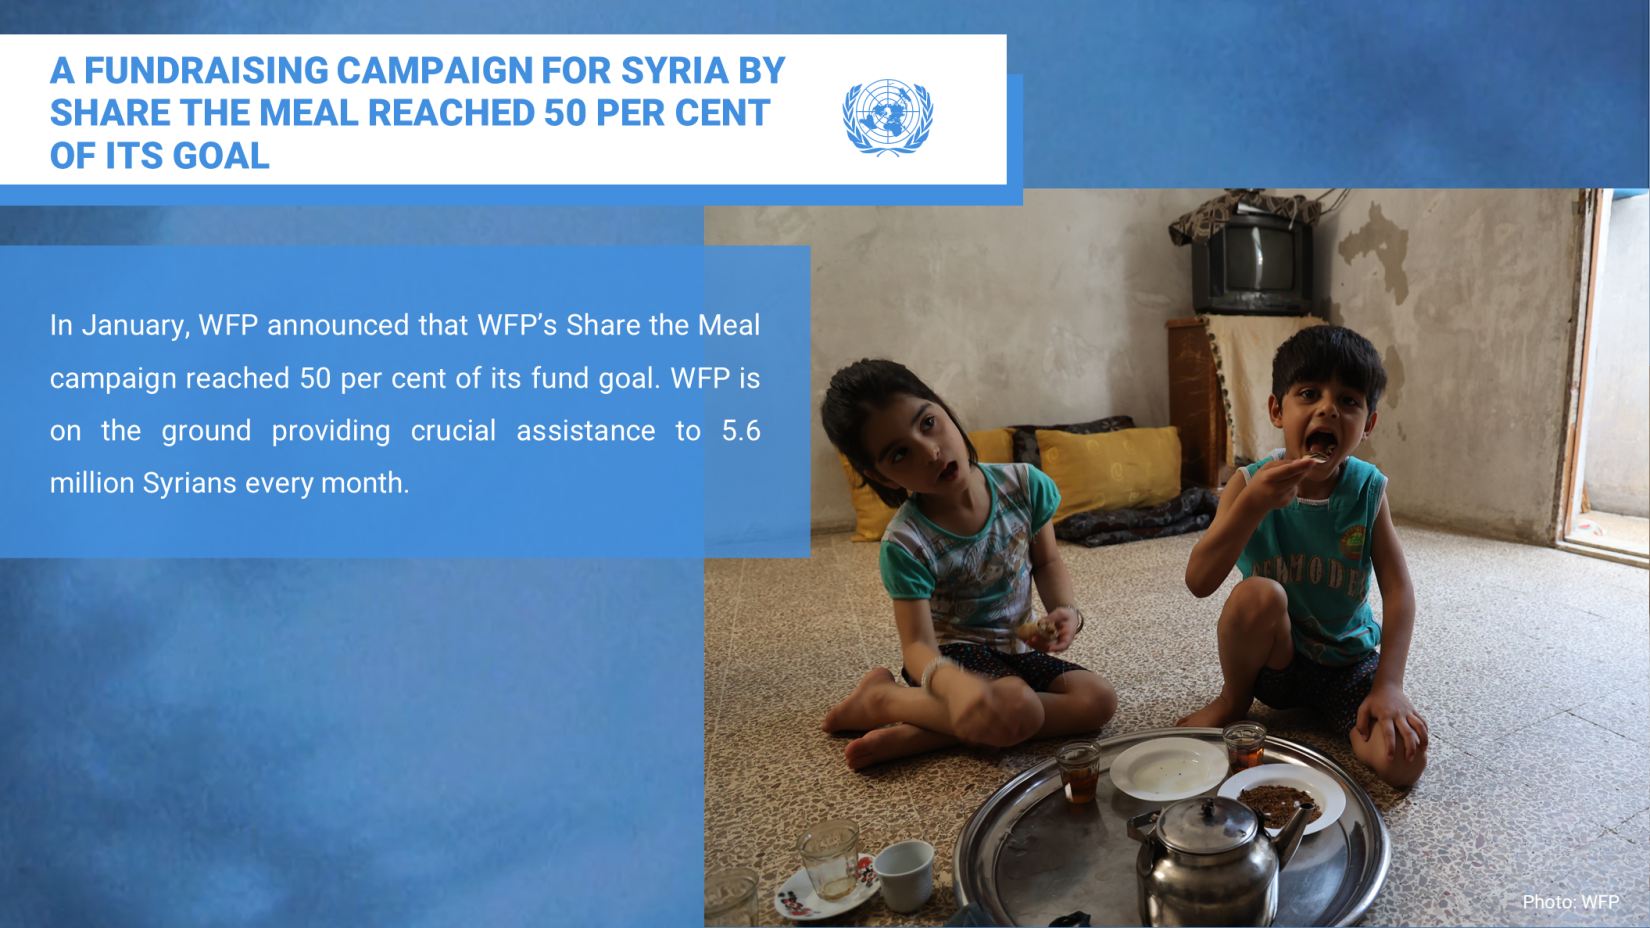 WFP A FUNDRAISING CAMPAIGN FOR SYRIA BY SHARE THE MEAL REACHES 50 PER CENT OF ITS GOAL